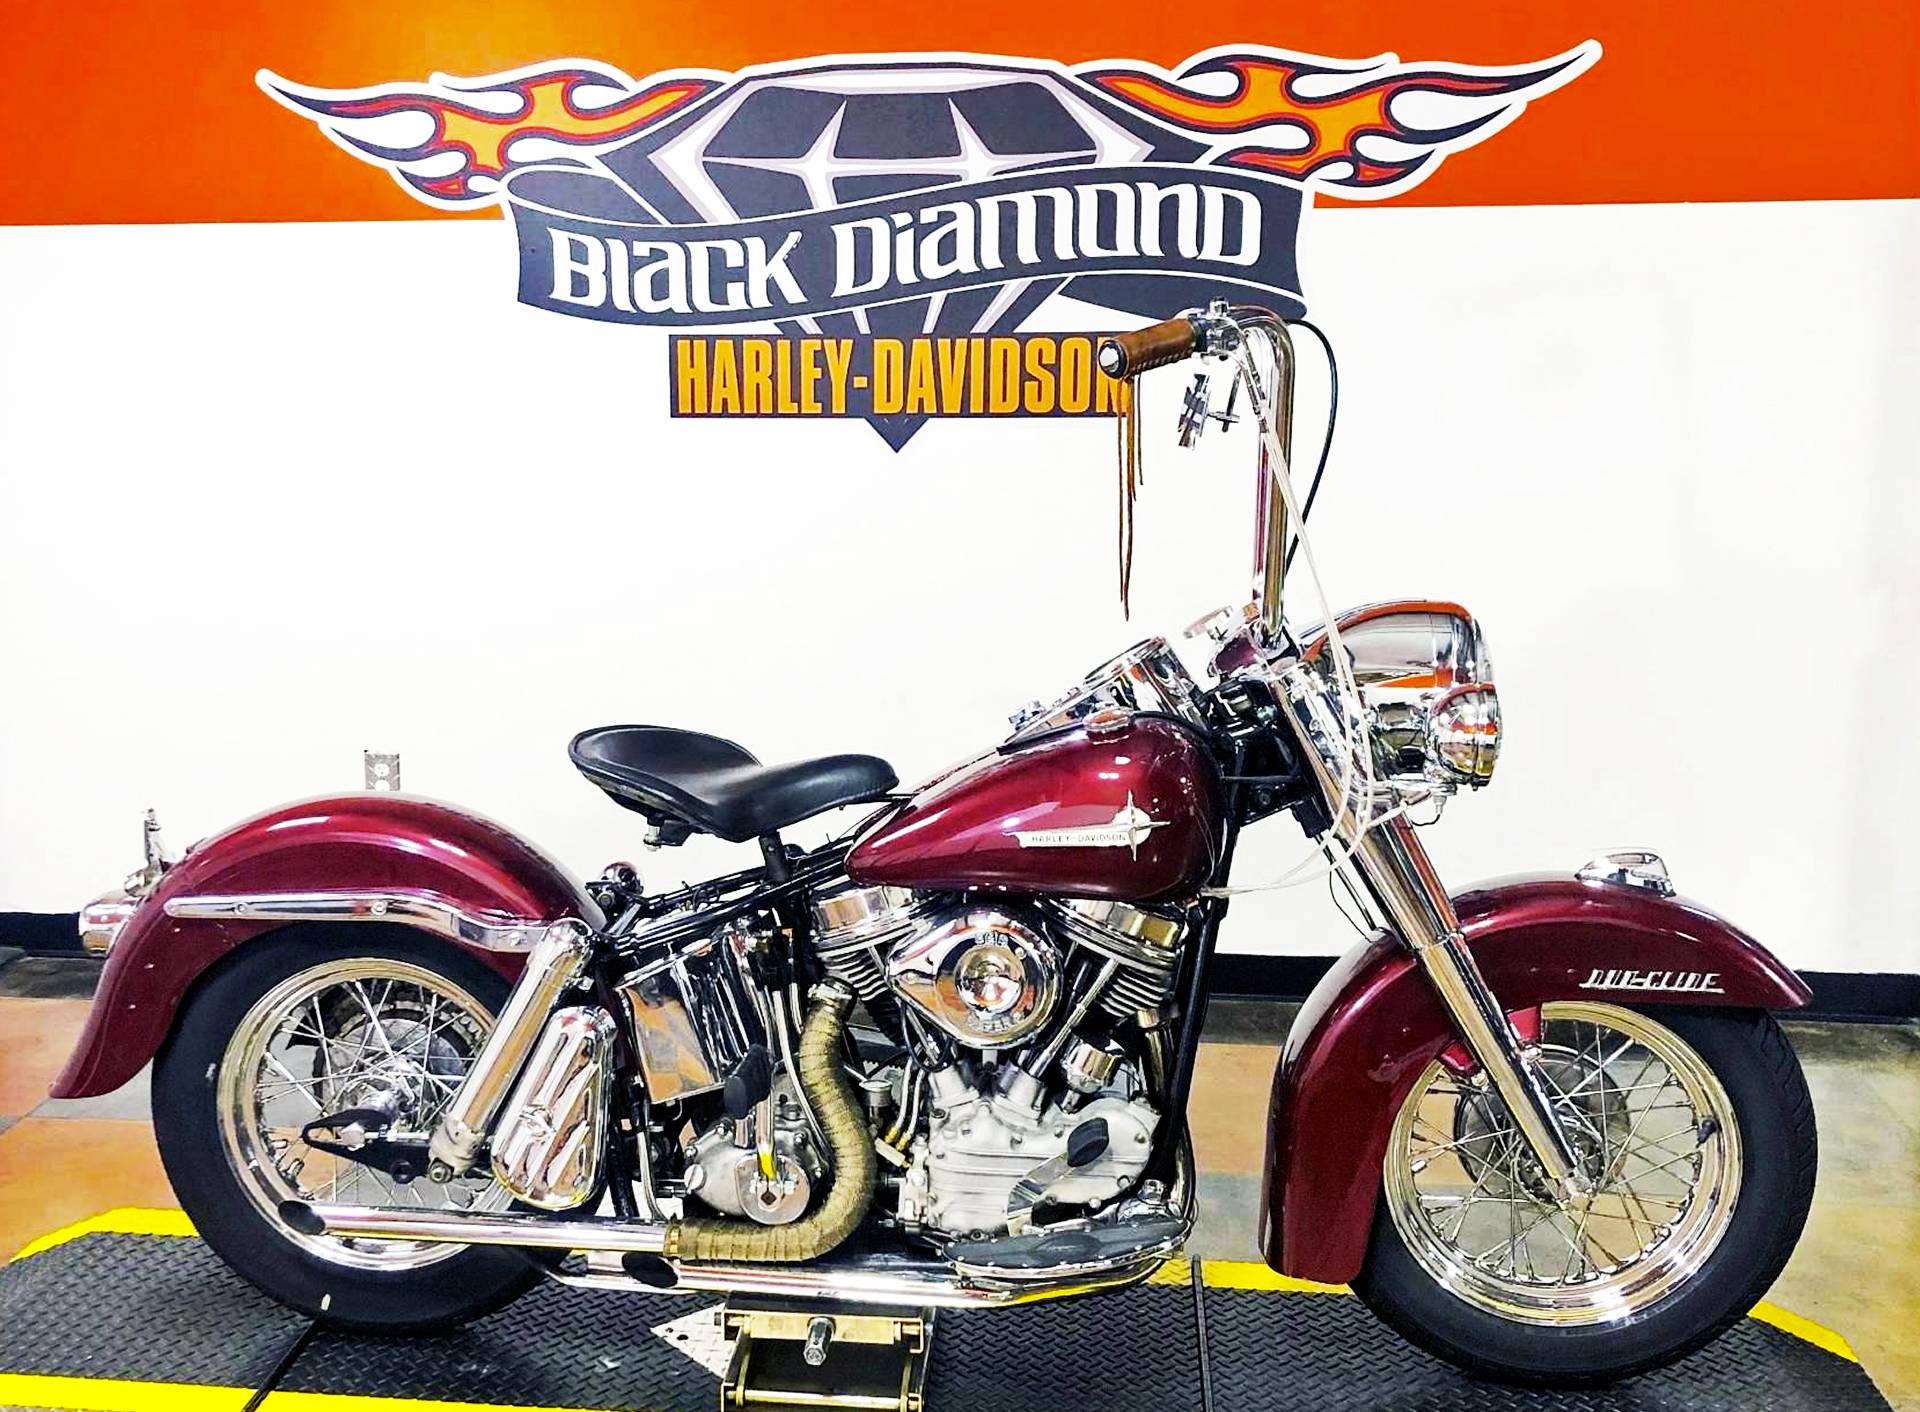 Used 1962 Harley Davidson Flh Burgundy Motorcycles In Marion Il Ulh2714